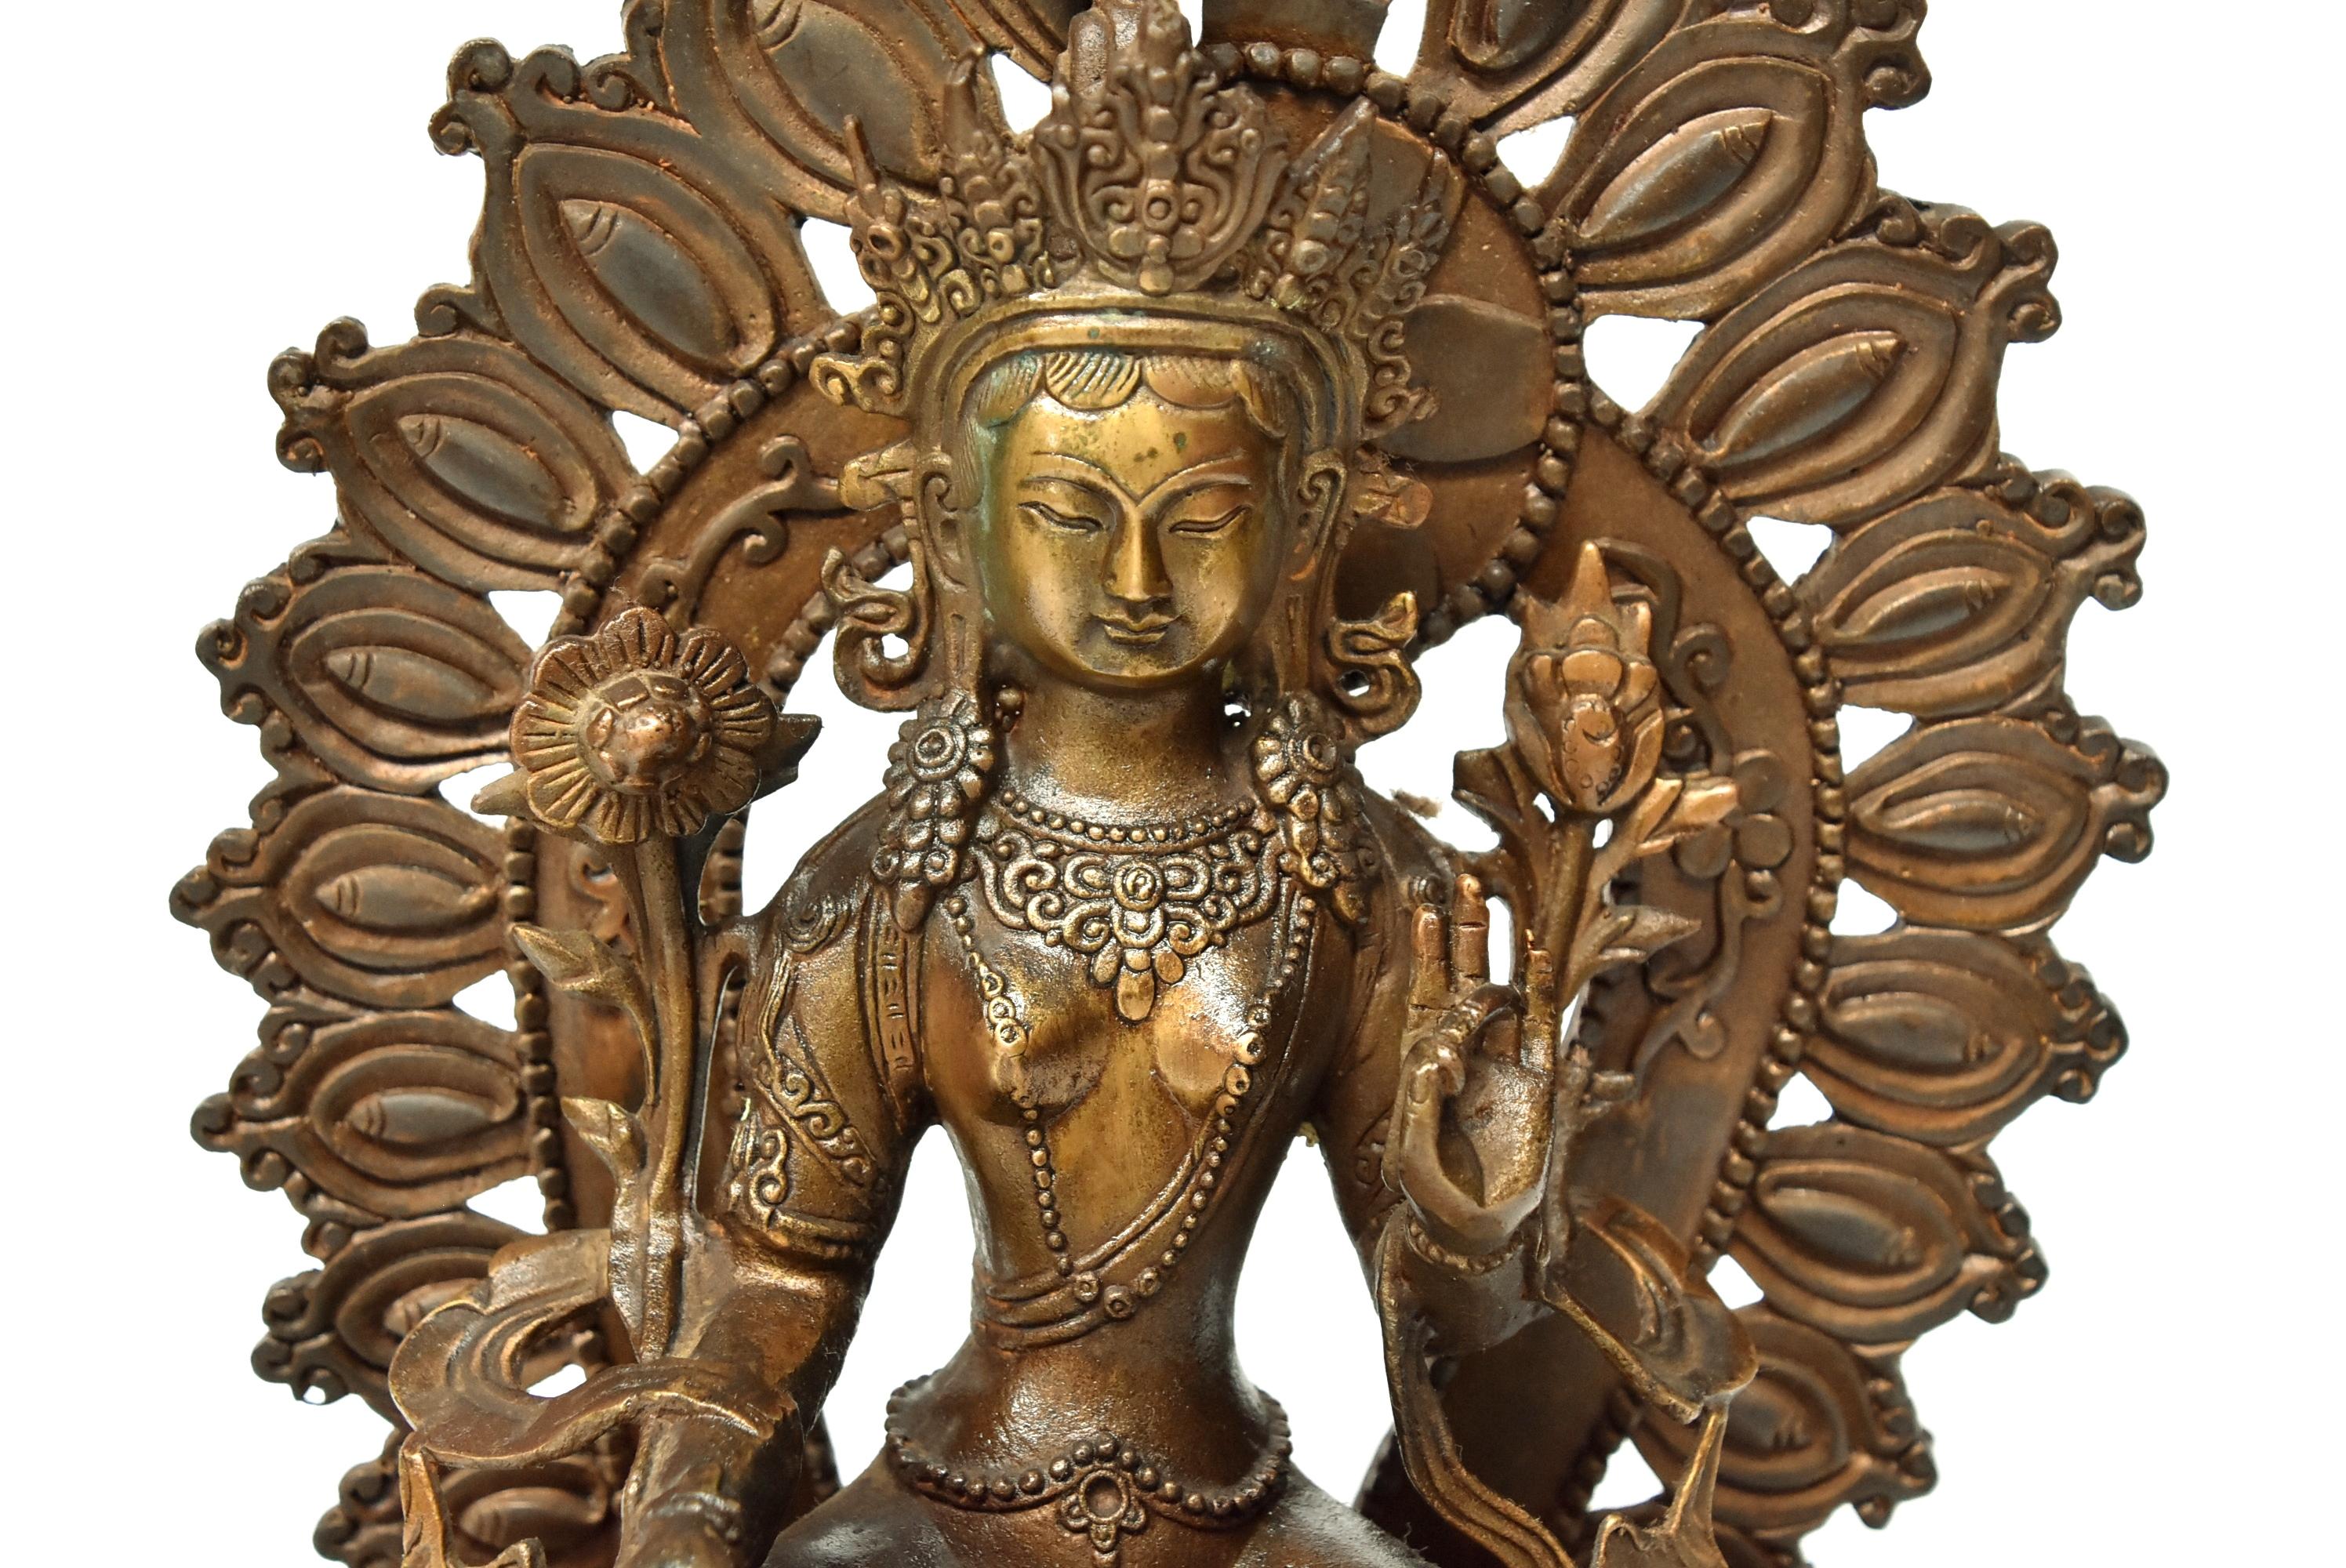 A beautiful antique brass Tibetan Green Tara. The Tara is seated on an elevated lotus throne, she wears a decorated crown and pearl lariats. She is surrounded by flowers and wrapped in a fluid sash. A removable back halo with fire pattern provides